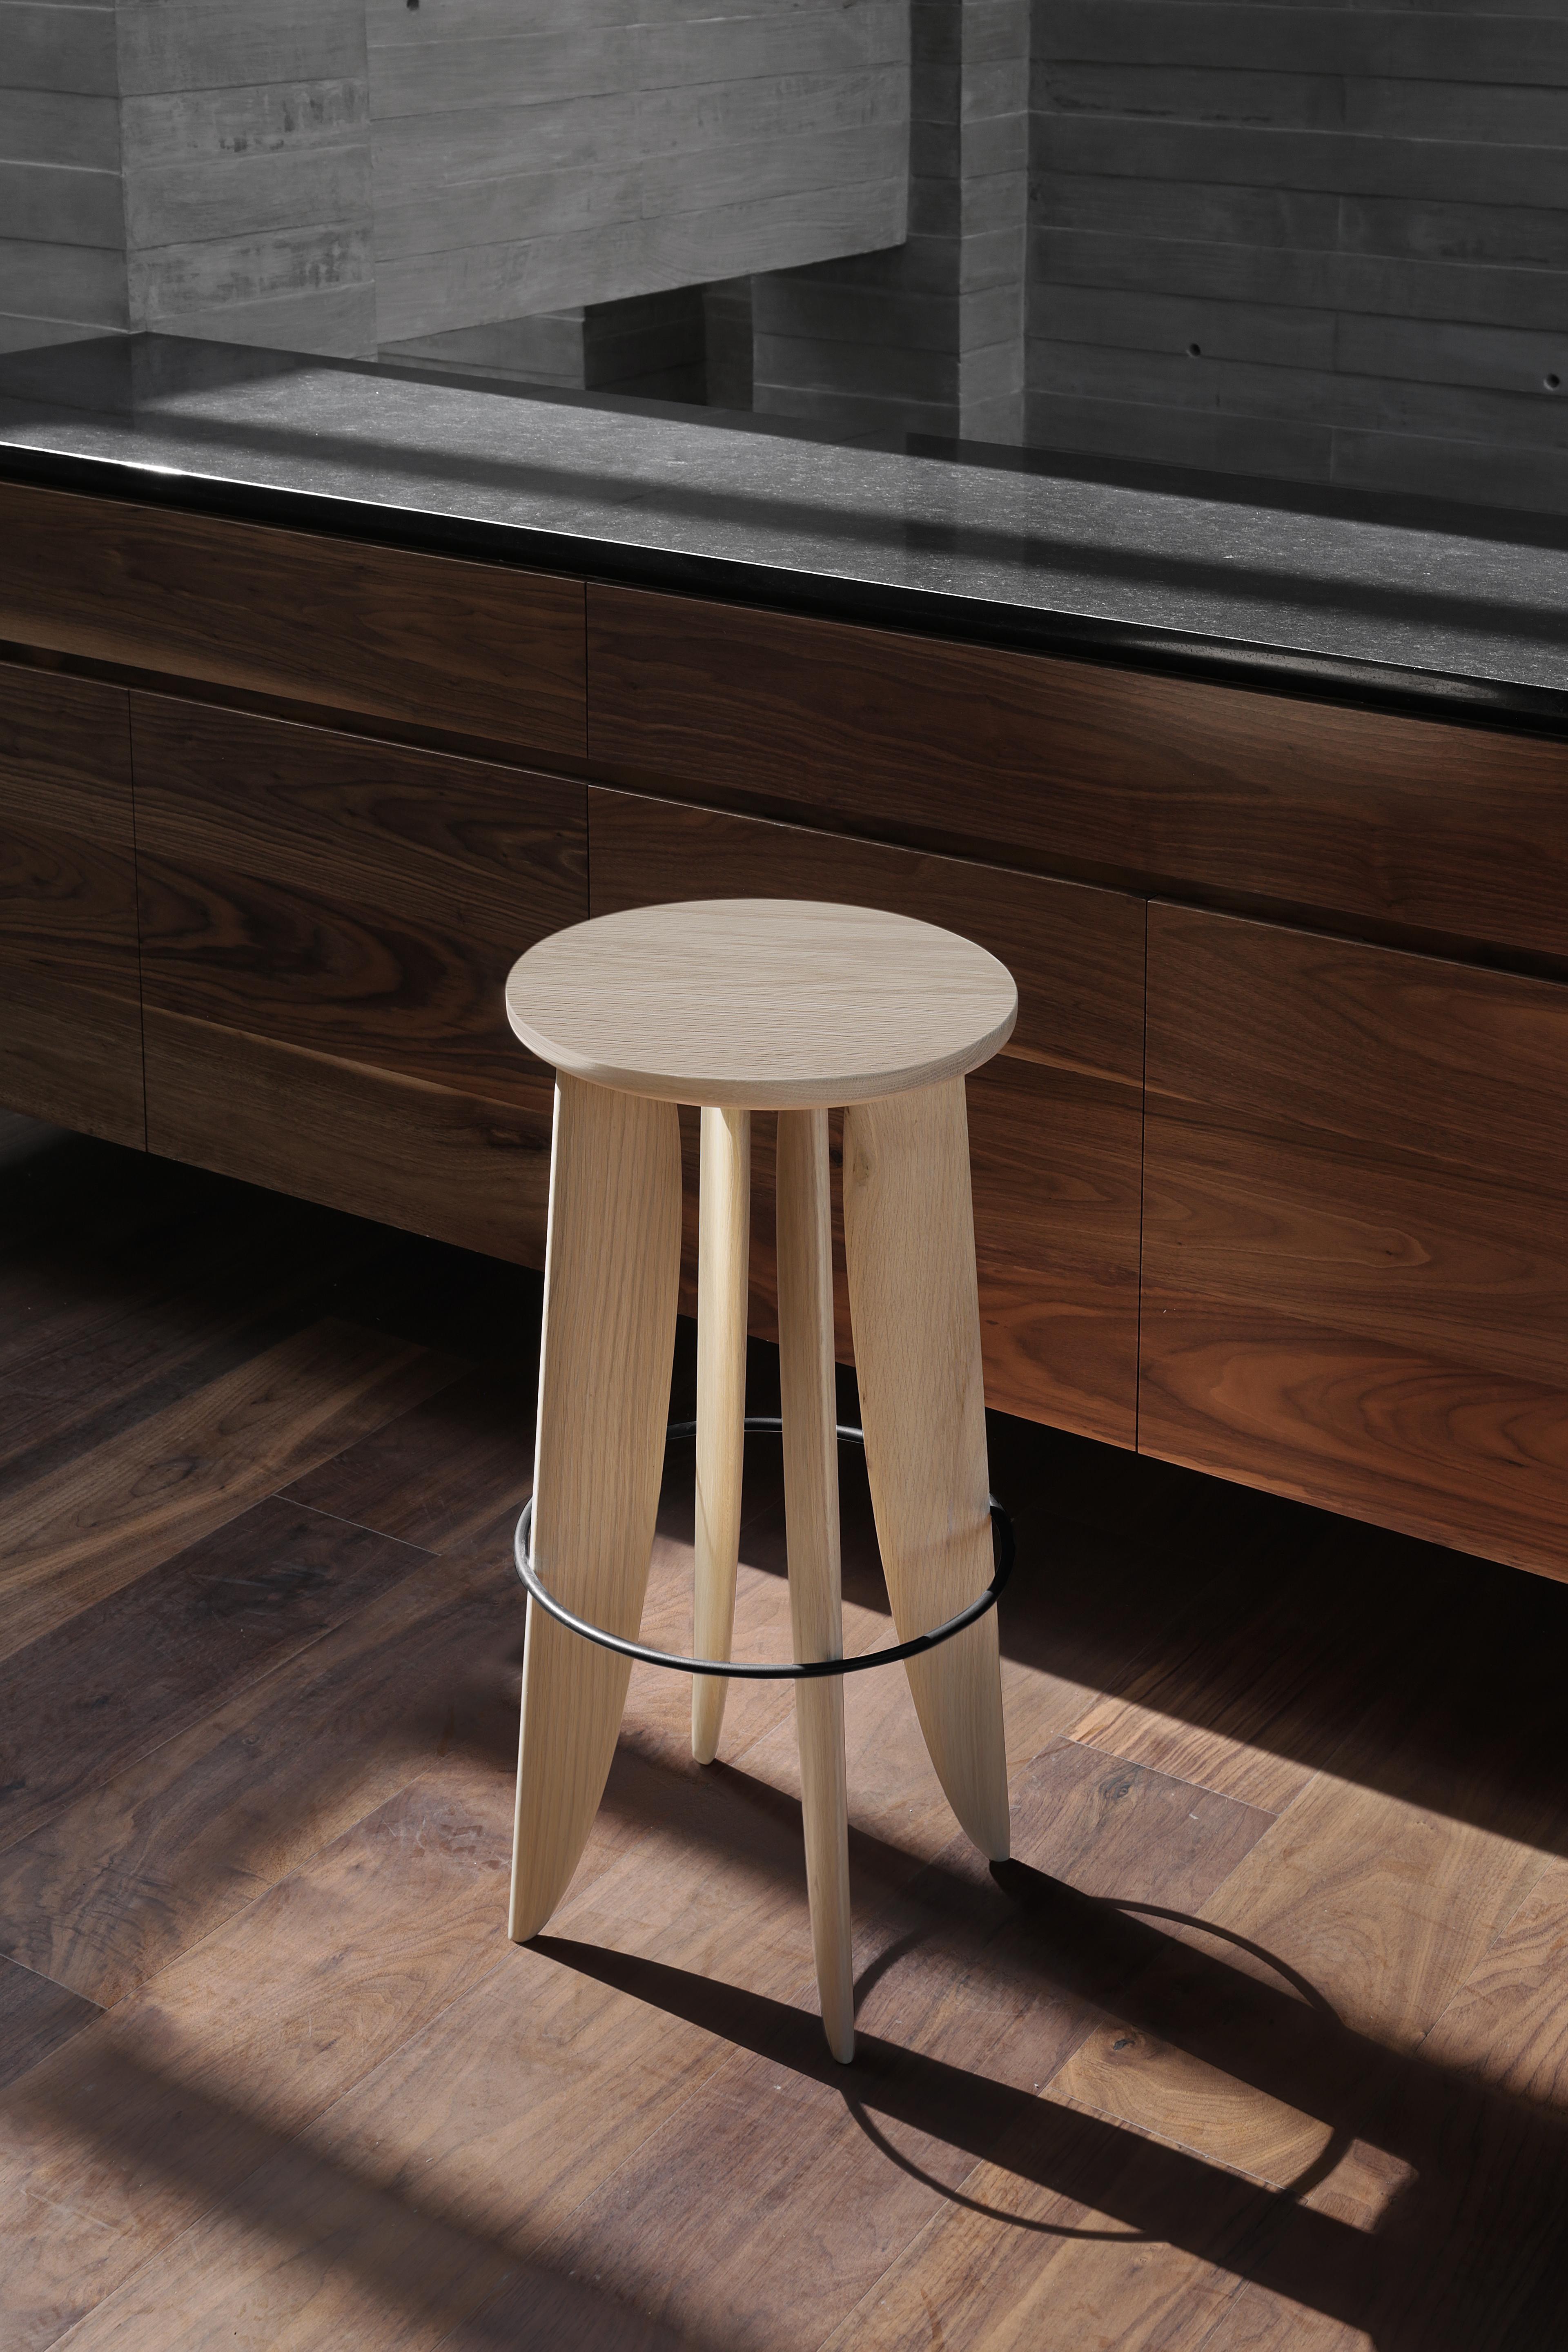 Noviembre XIII Counter Stool in Oak Wood by Joel Escalona

The Noviembre collection is inspired by the creative values of Constantin Brancusi, a Romanian sculptor considered one of the most influential artists of the twentieth century, who, through